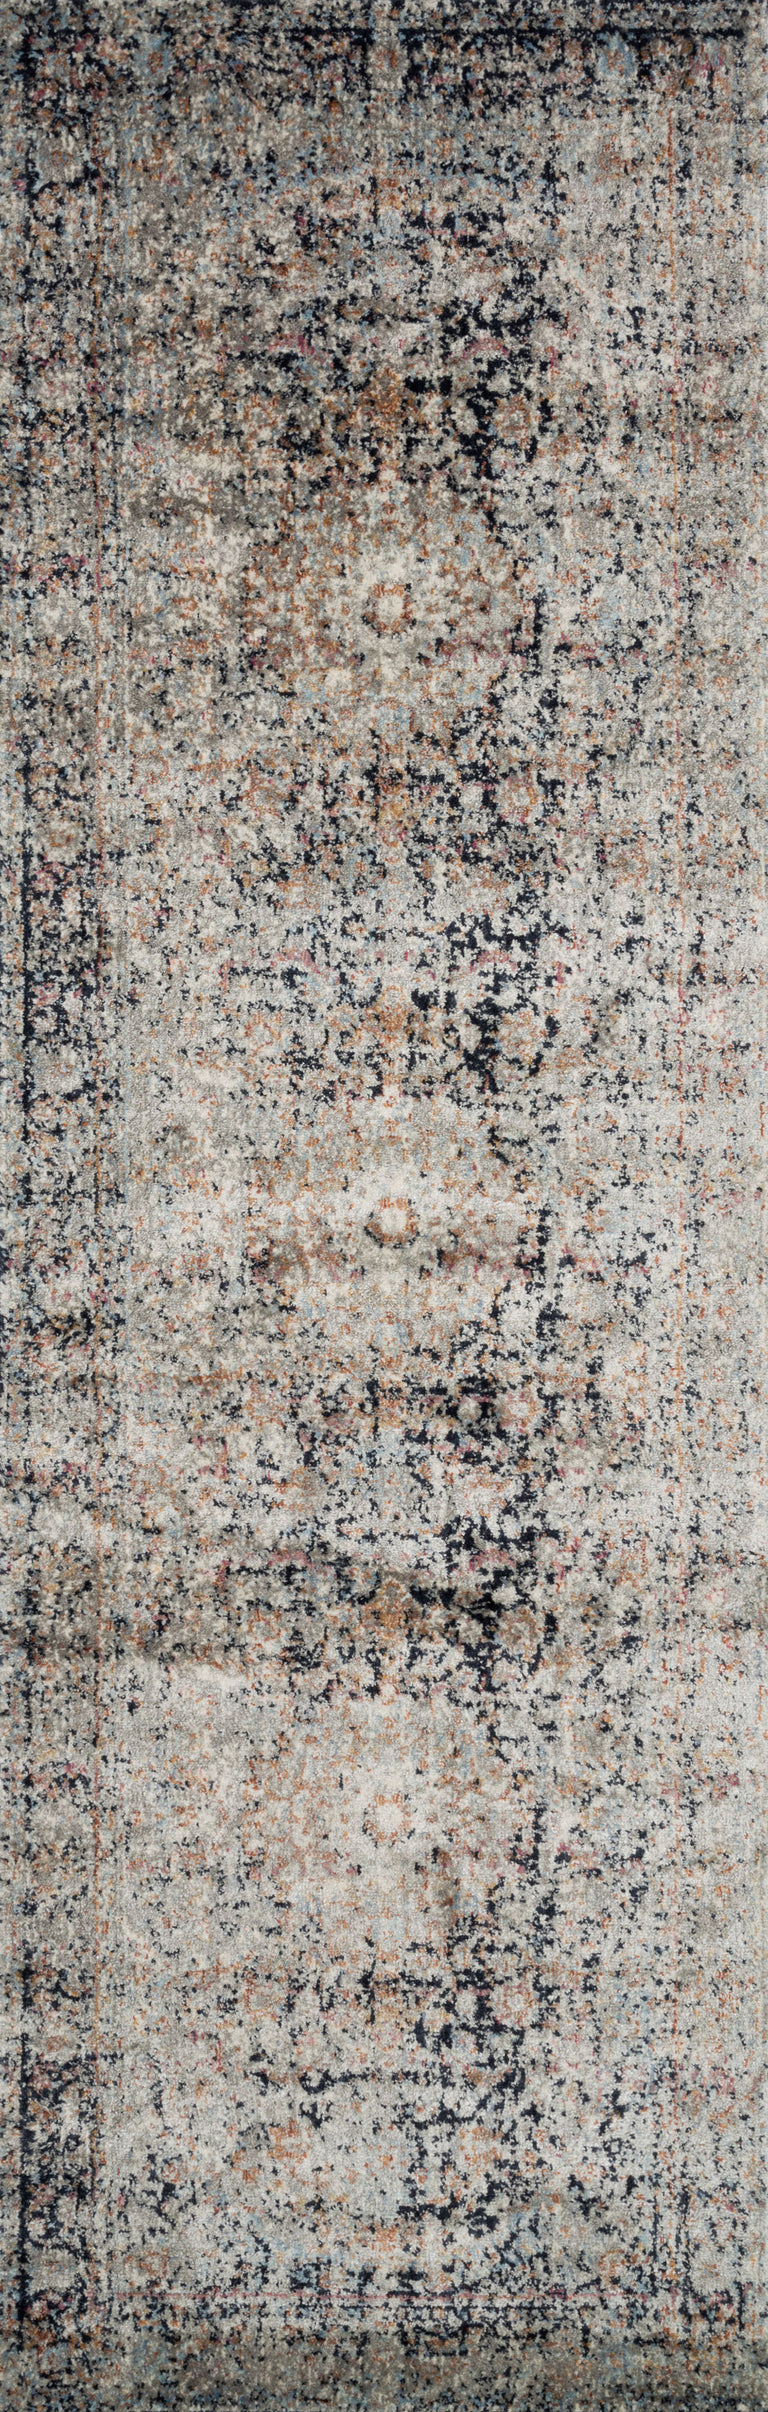 Loloi Rugs Anastasia Collection Rug in Charcoal, Sunset - 9'6" x 13'